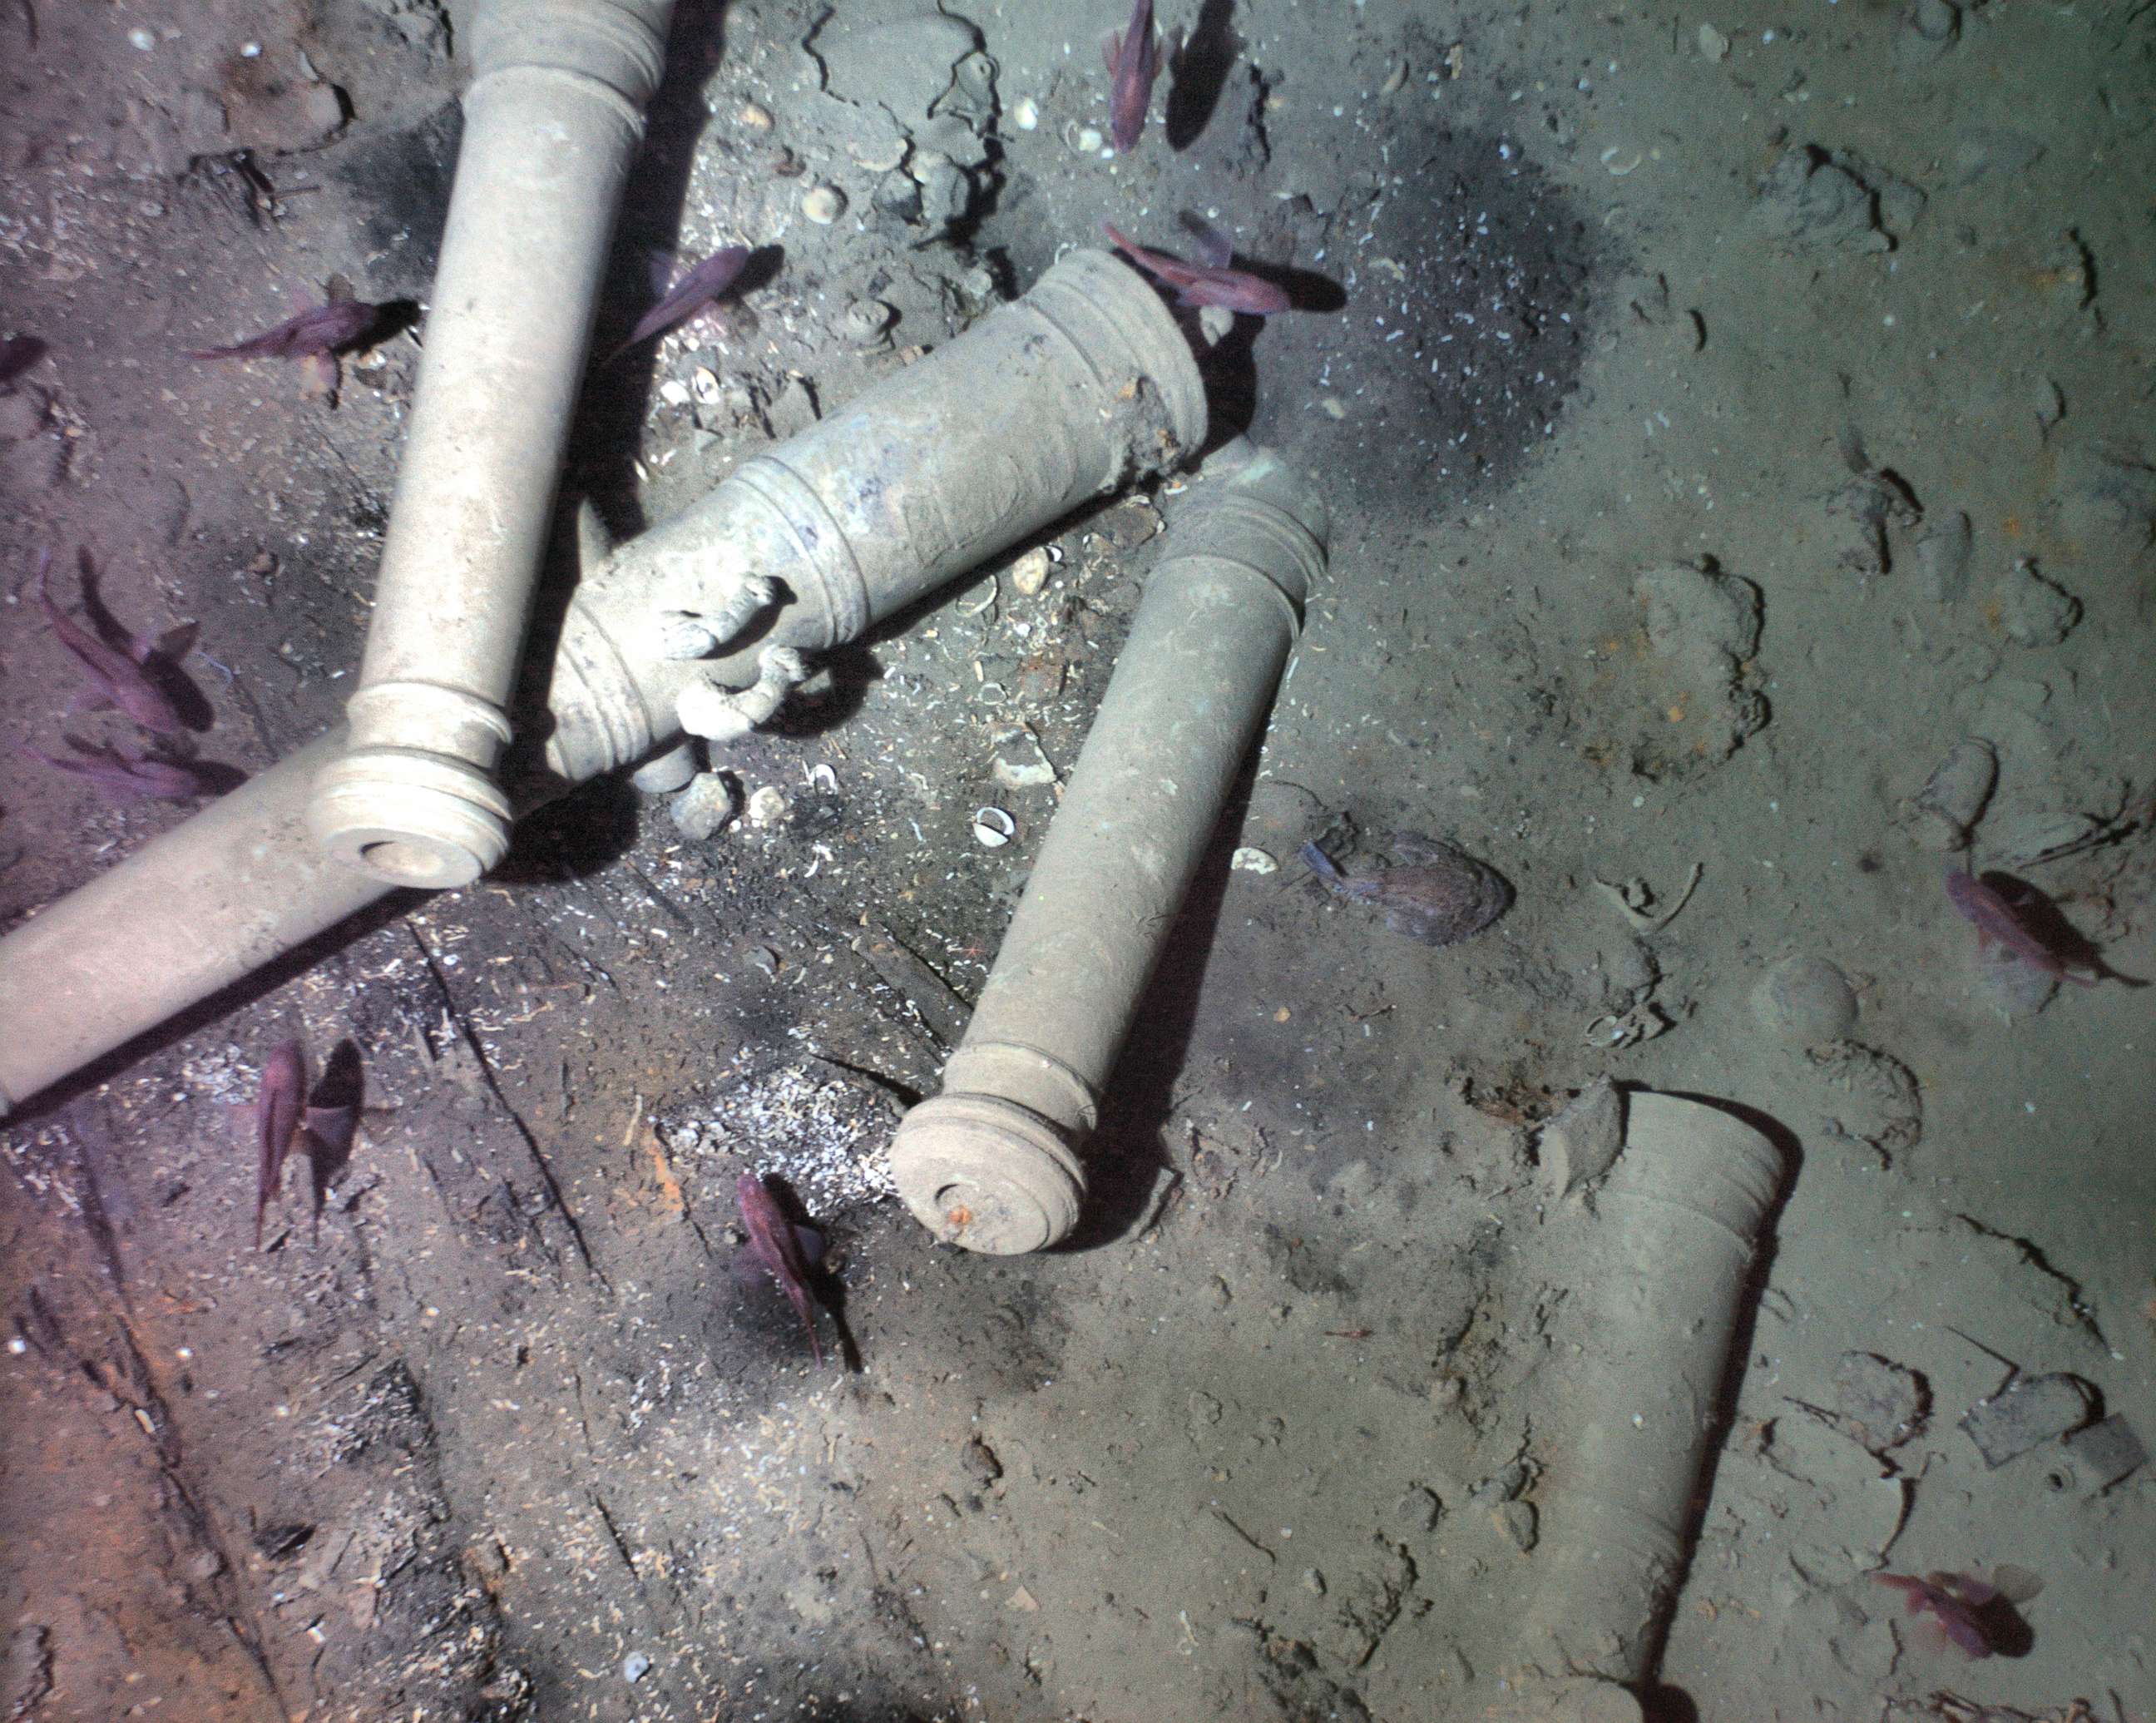 PHOTO: This November 2015 photo released Monday, May 21, 2018, by the Woods Hole Oceanographic Institution shows cannons from the 300-year-old shipwreck of the Spanish galleon San Jose on the floor of the Caribbean Sea off the coast of Colombia.